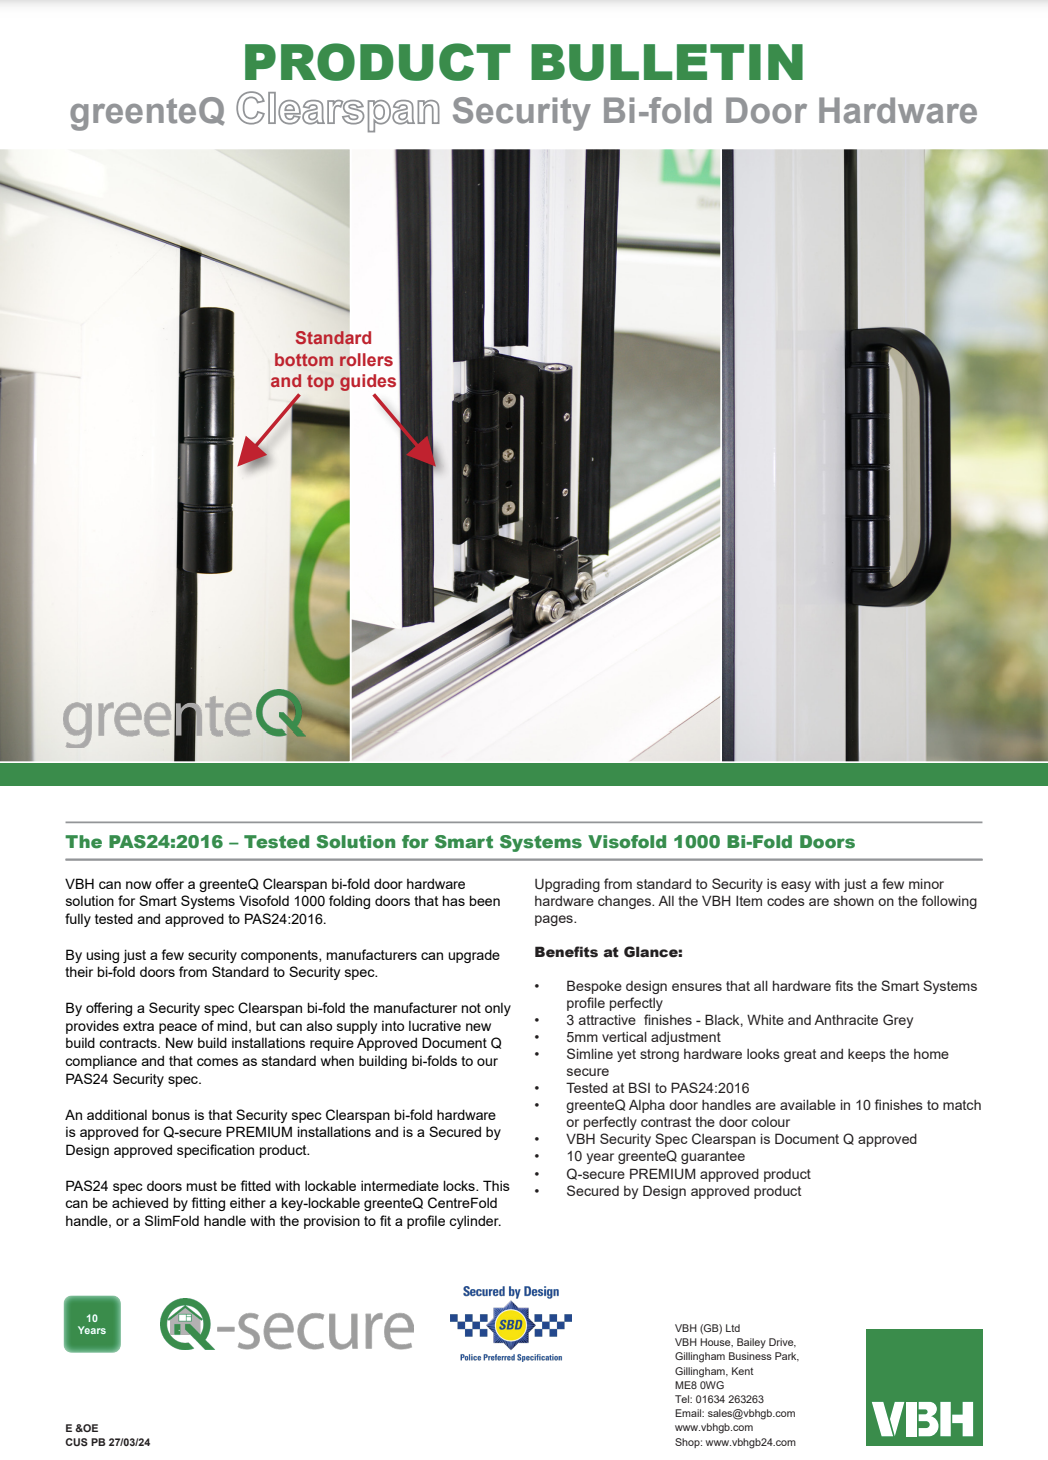 greenteQ Clearspan Bi-Fold Door Hardware to suit Smart Systems Visofold 1000